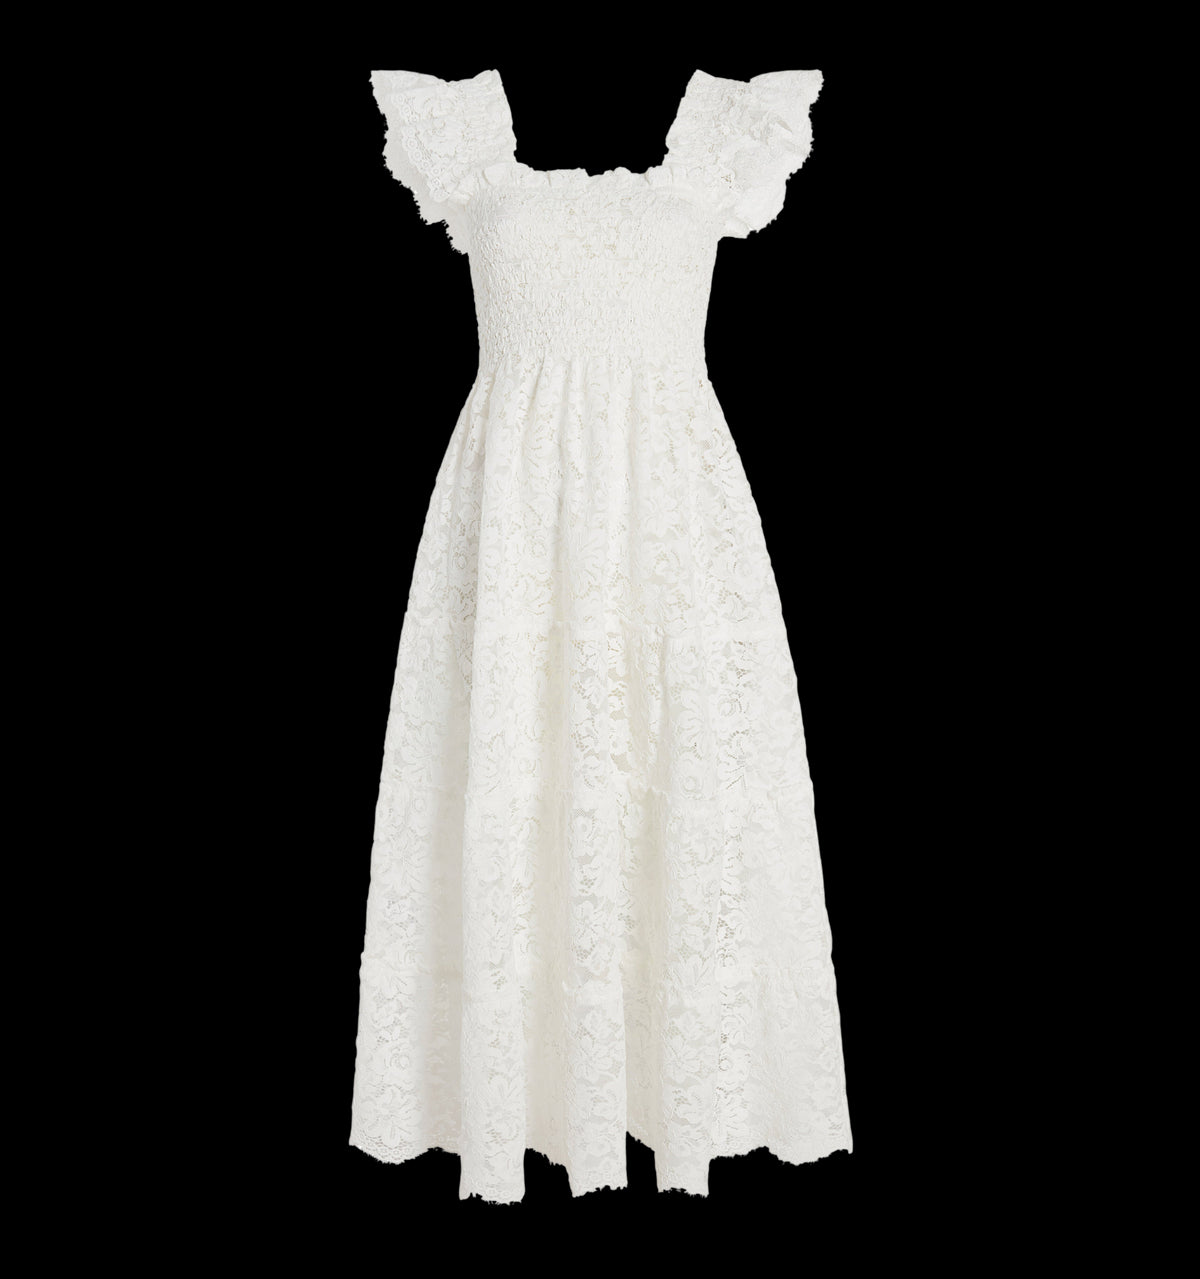 The Lace Ellie Nap Dress in White Lace